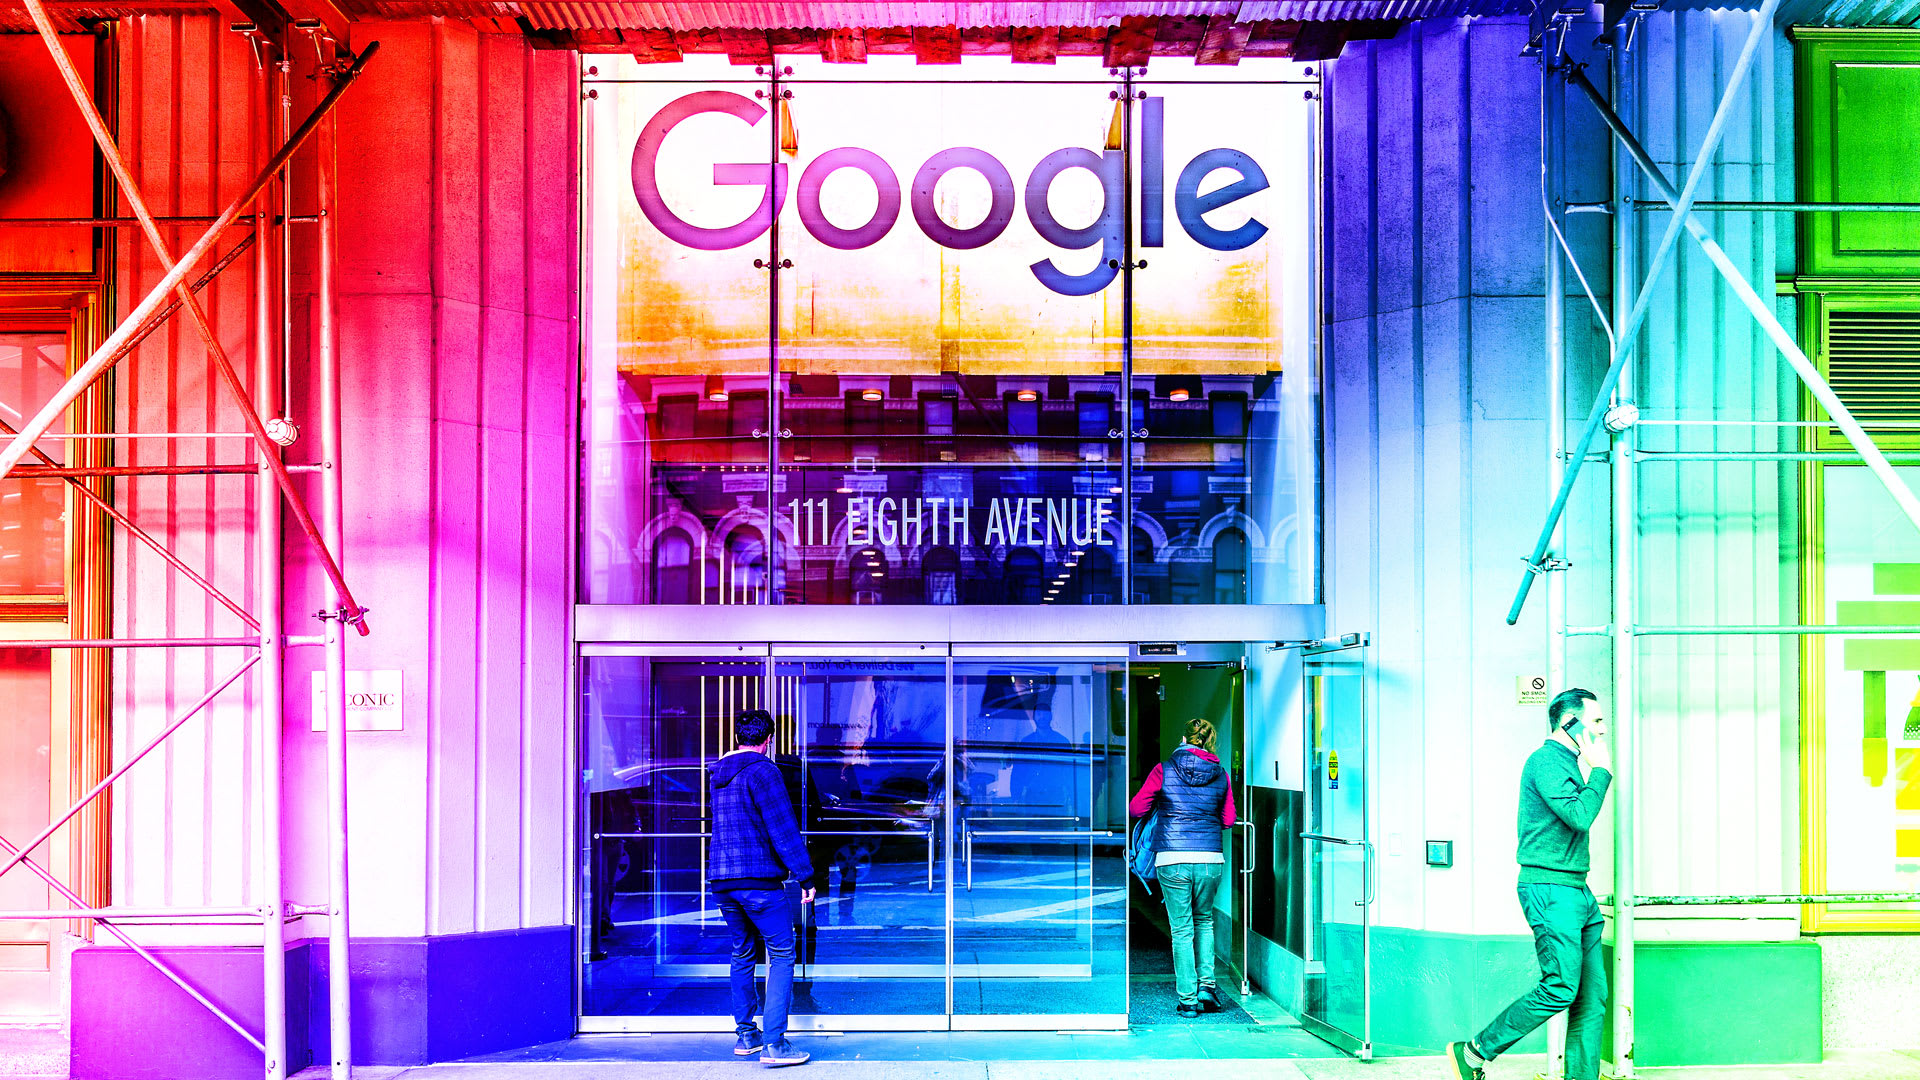 I worked at Google: Here’s how to regain trust and work with tech’s critics